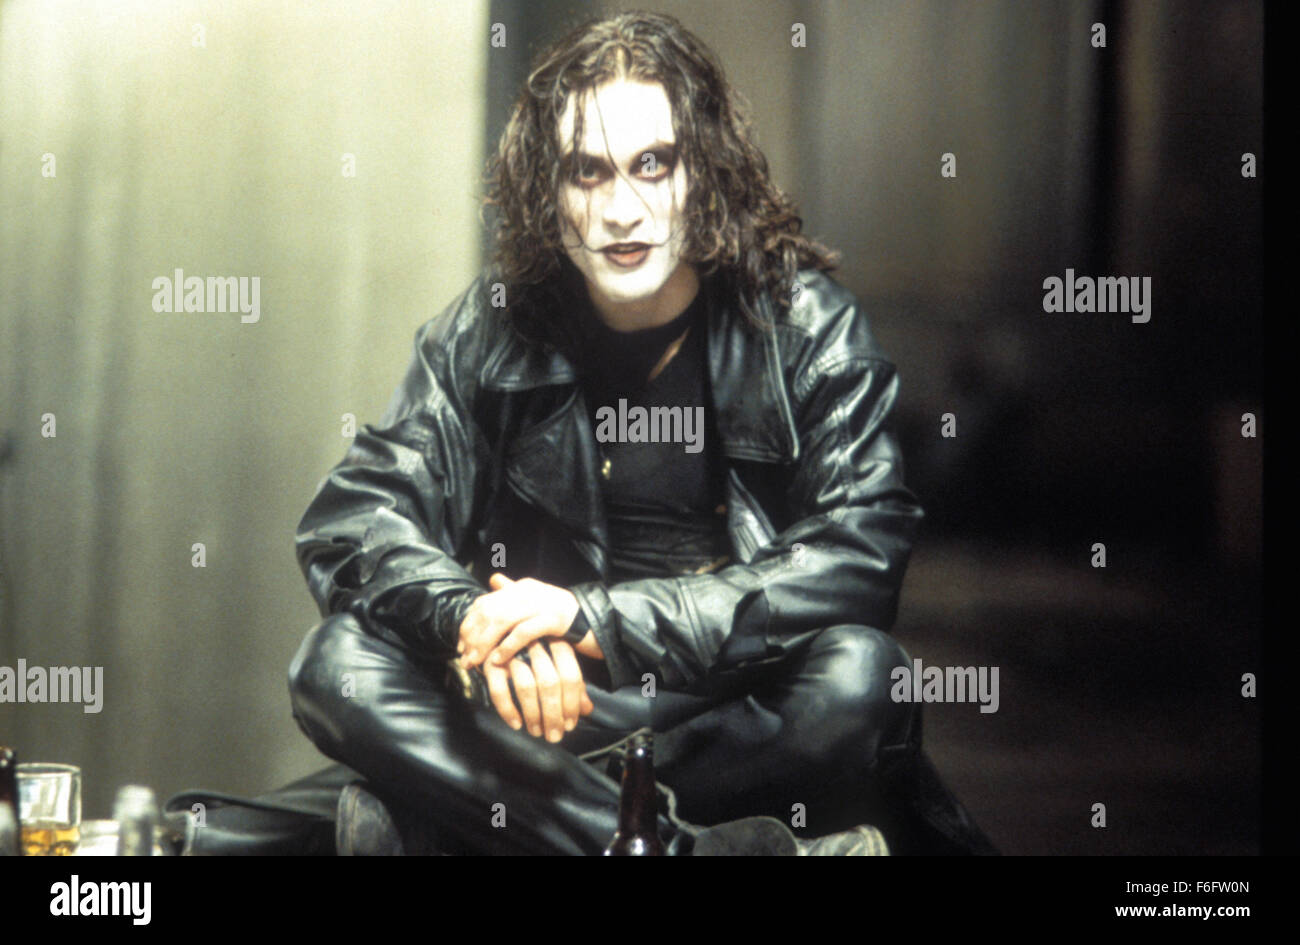 RELEASE DATE: May 11, 1994. MOVIE TITLE: The Crow. STUDIO: Miramax Films. PLOT: Eric Draven and his fiancee are brutally murdered on Devil's Night, a night when the henchmen of crime-boss Top Dollar traditionally indulge in wanton acts of violence and arson. A crow brings Draven's restless soul back from the dead and he sets out to wreak revenge upon his killers. PICTURED: BRANDON LEE as Eric Draven. Stock Photo